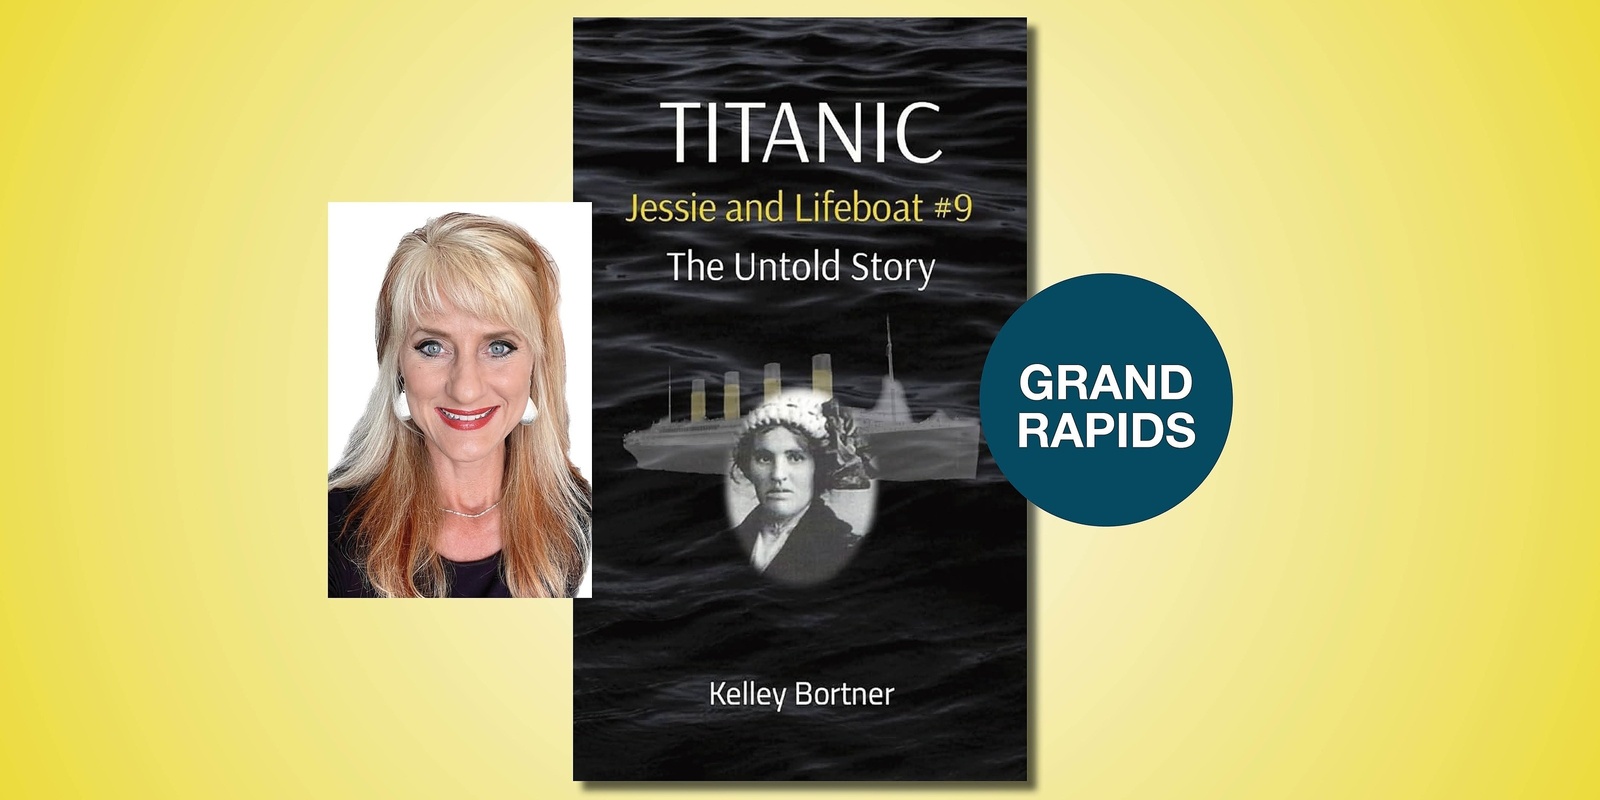 Banner image for TITANIC Jessie and Lifeboat #9 with Kelley Bortner